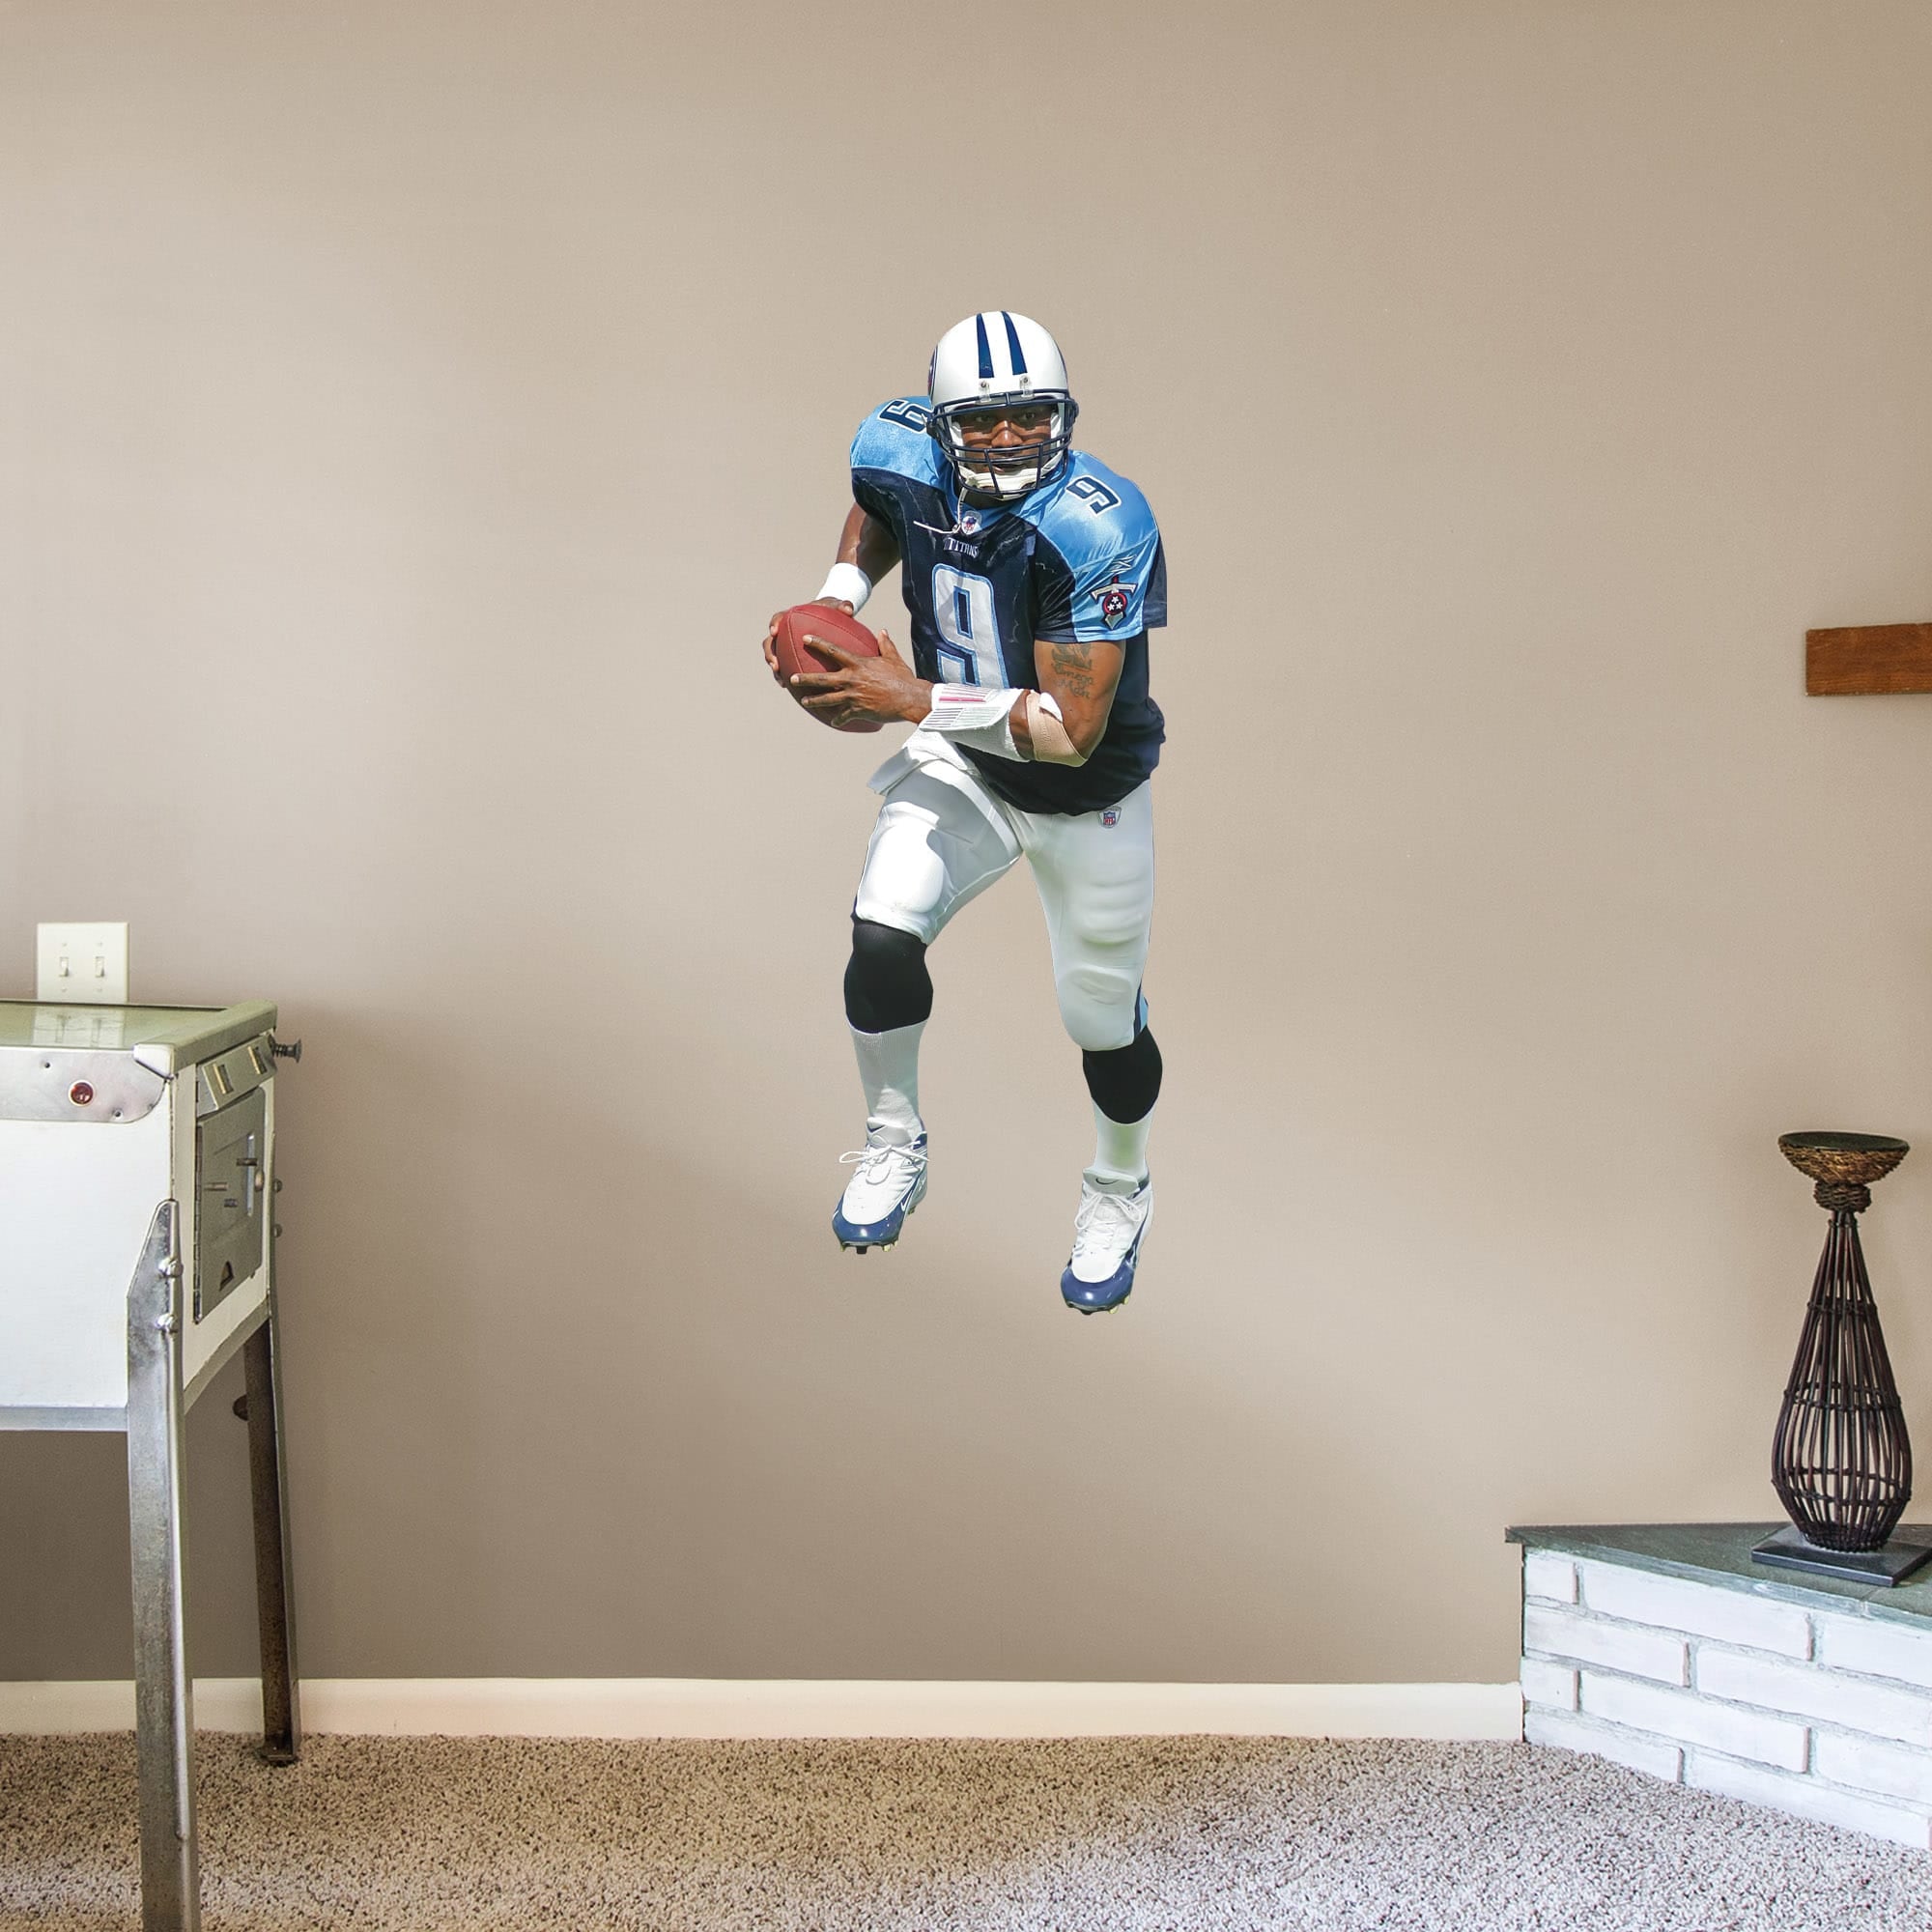 Steve McNair for Tennessee Titans: Titans Legend - Officially Licensed NFL Removable Wall Decal Giant Athlete + 2 Decals (21"W x